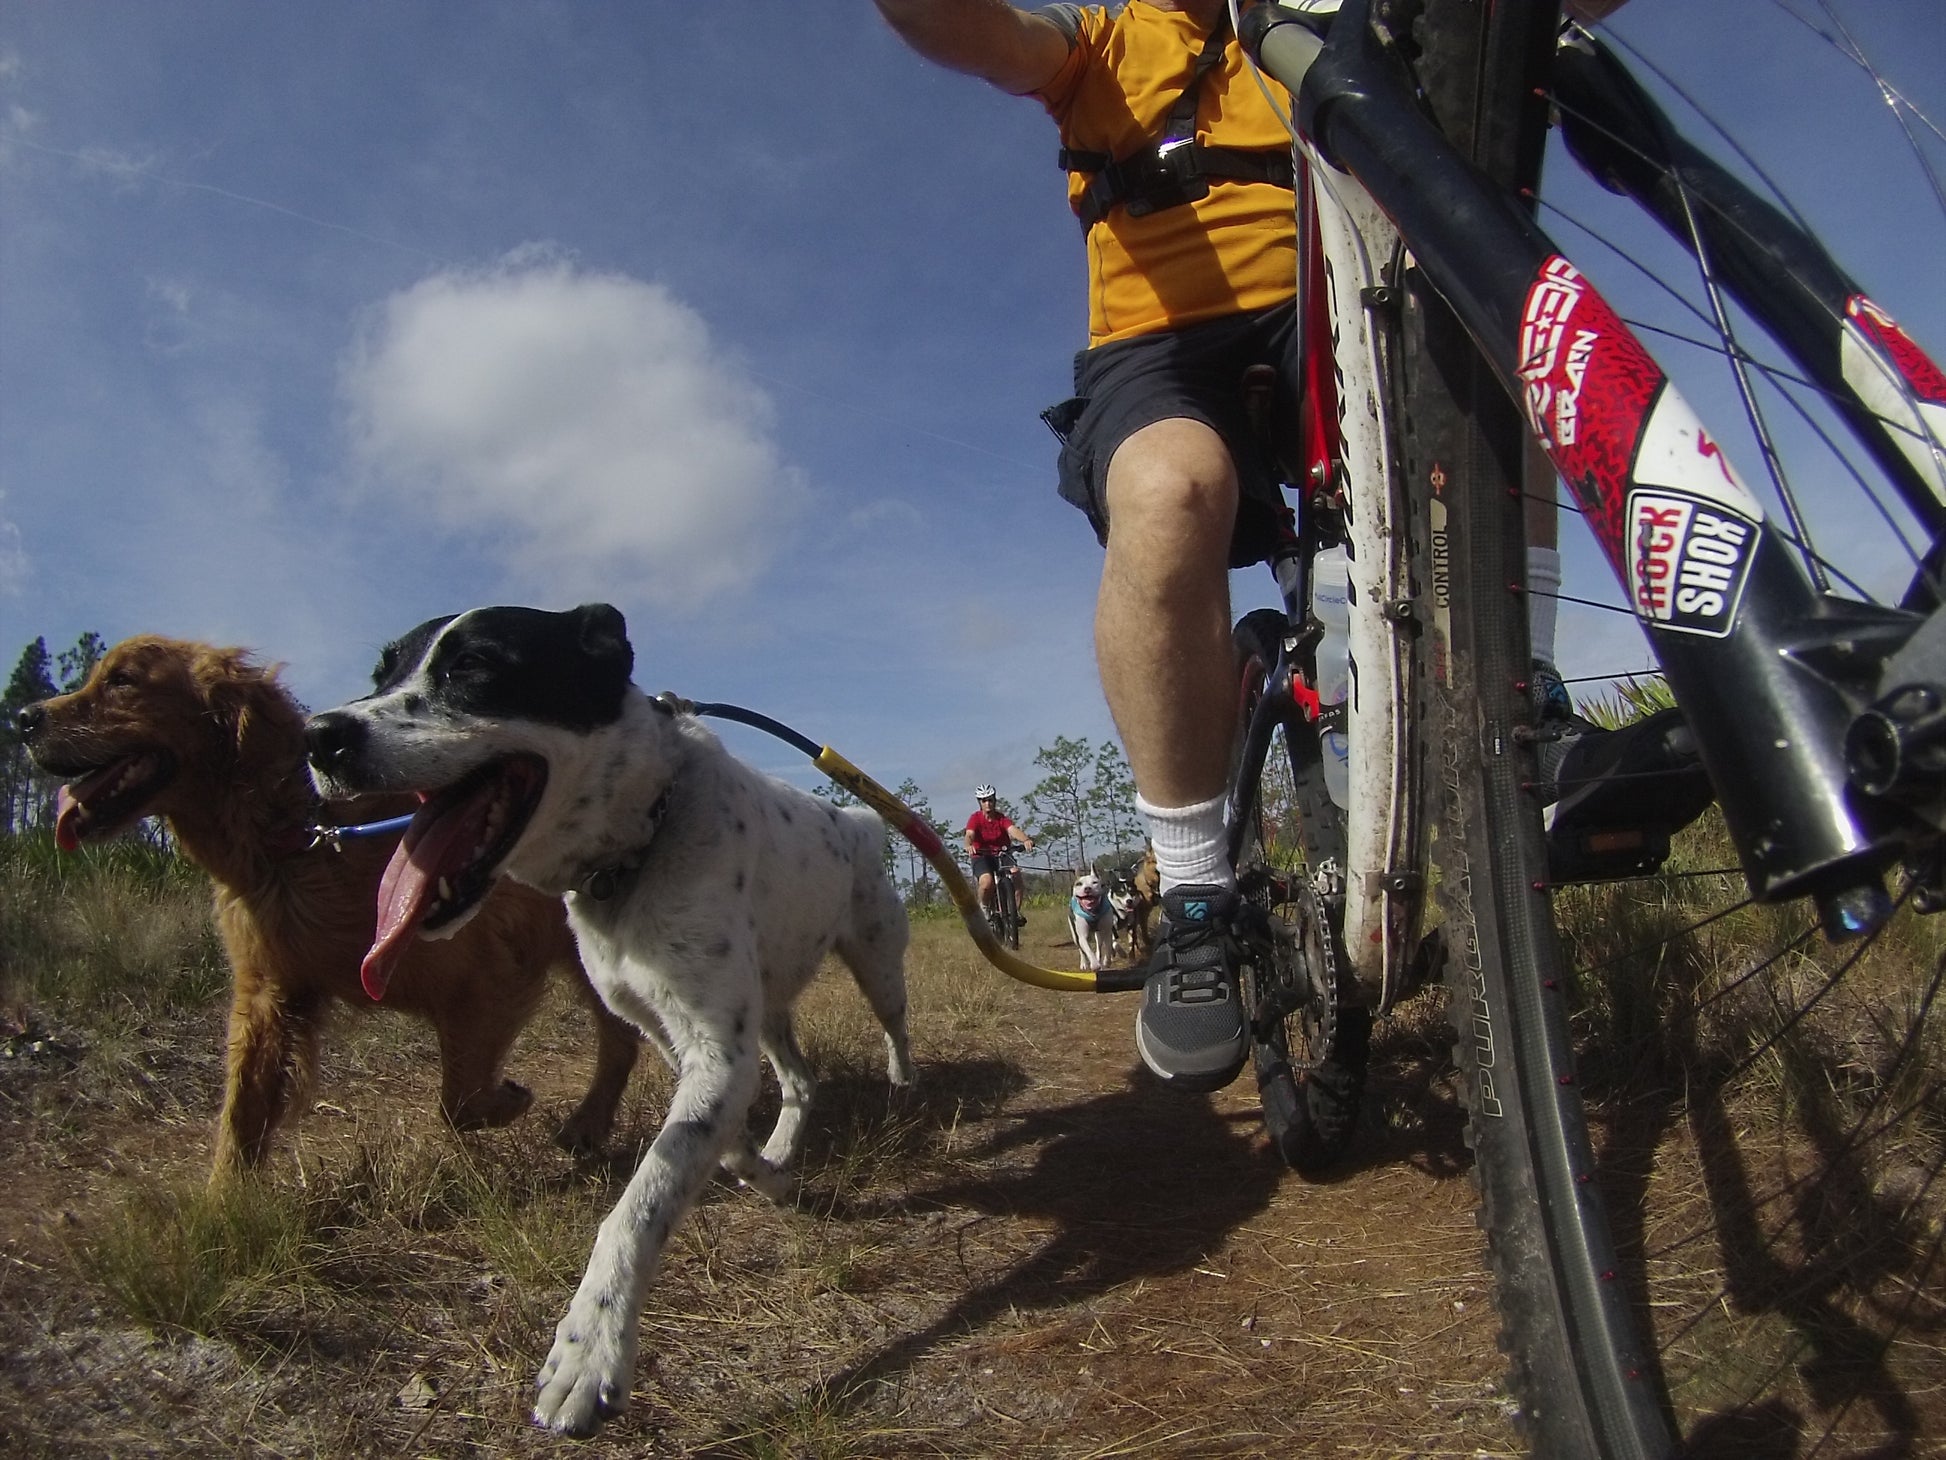 A White dog with black spots & pointy ears clipped to a yellow Bike Tow Leash®, on the right, attached to a red & white bike, the rider is wearing an orange shirt; the golden retriever is attached to the Bike Tow Leash via the BTL dog coupler. in the background is a trail with other dogs and bikers racing in the same dry mush race.